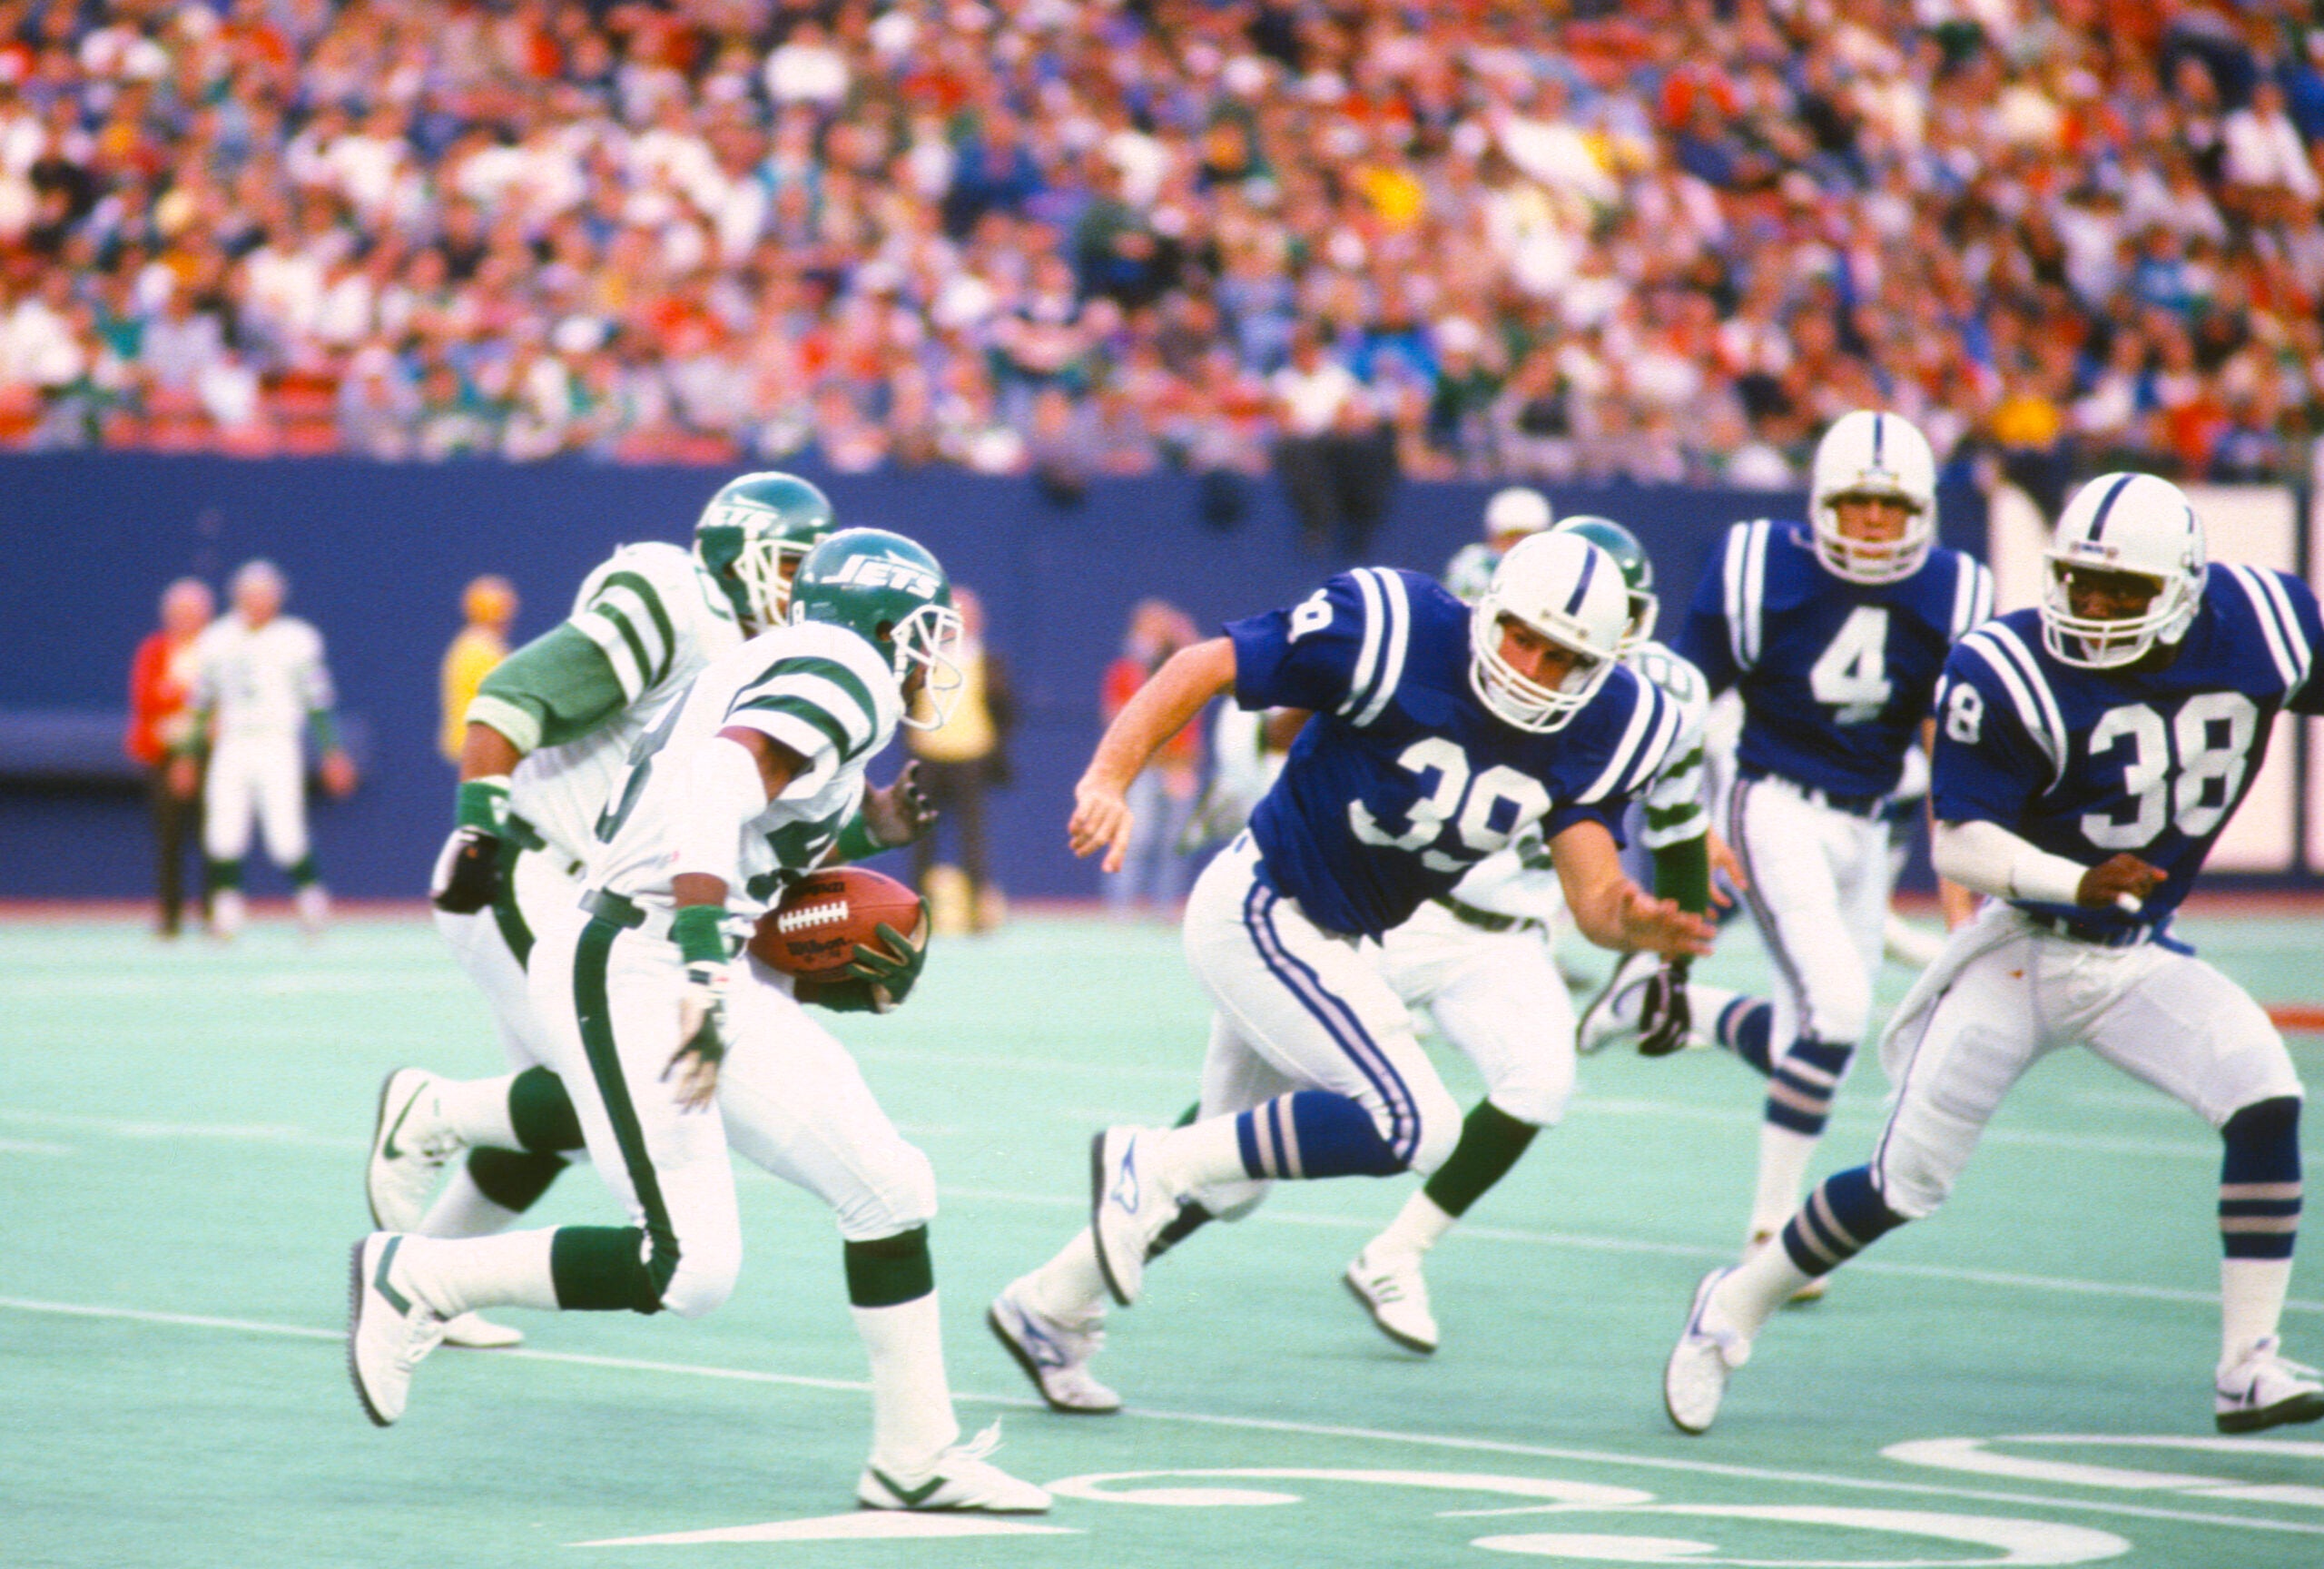 March 28, 1984: When the Colts ditched Baltimore and moved to Indy
overnight